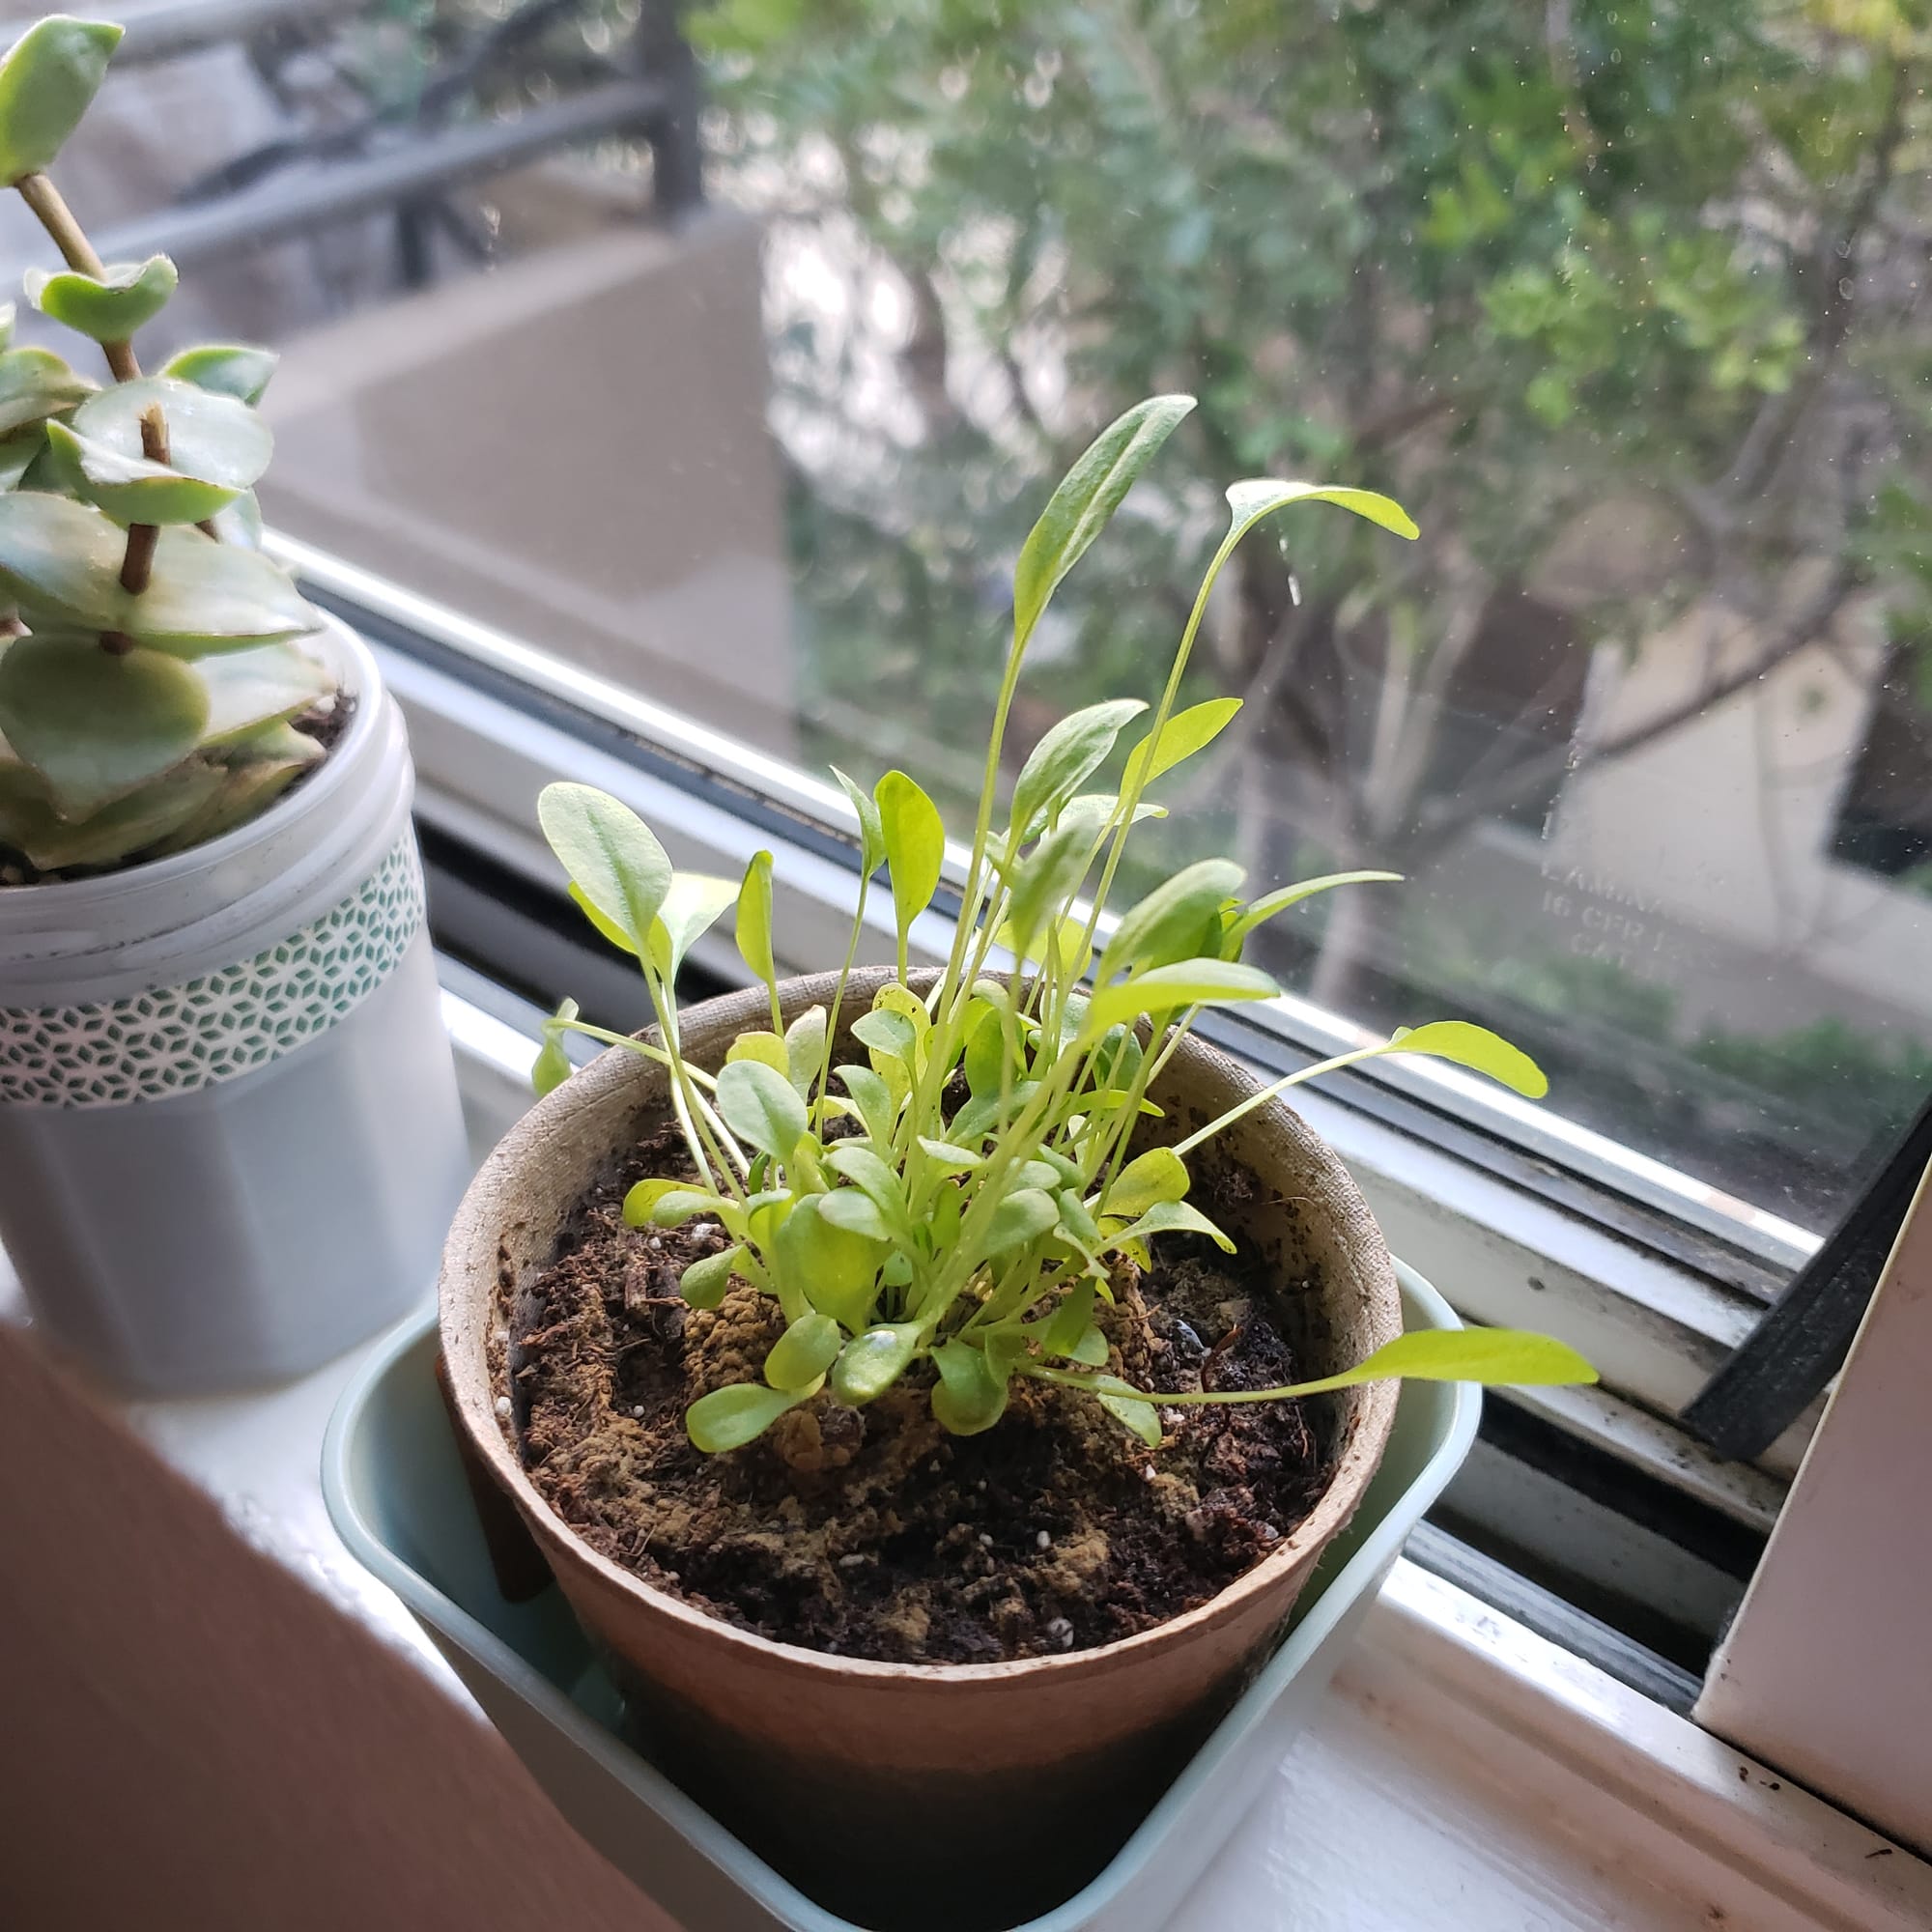 Dan's sorrel plant, alive and healthy, in a small pot on a windowsill.